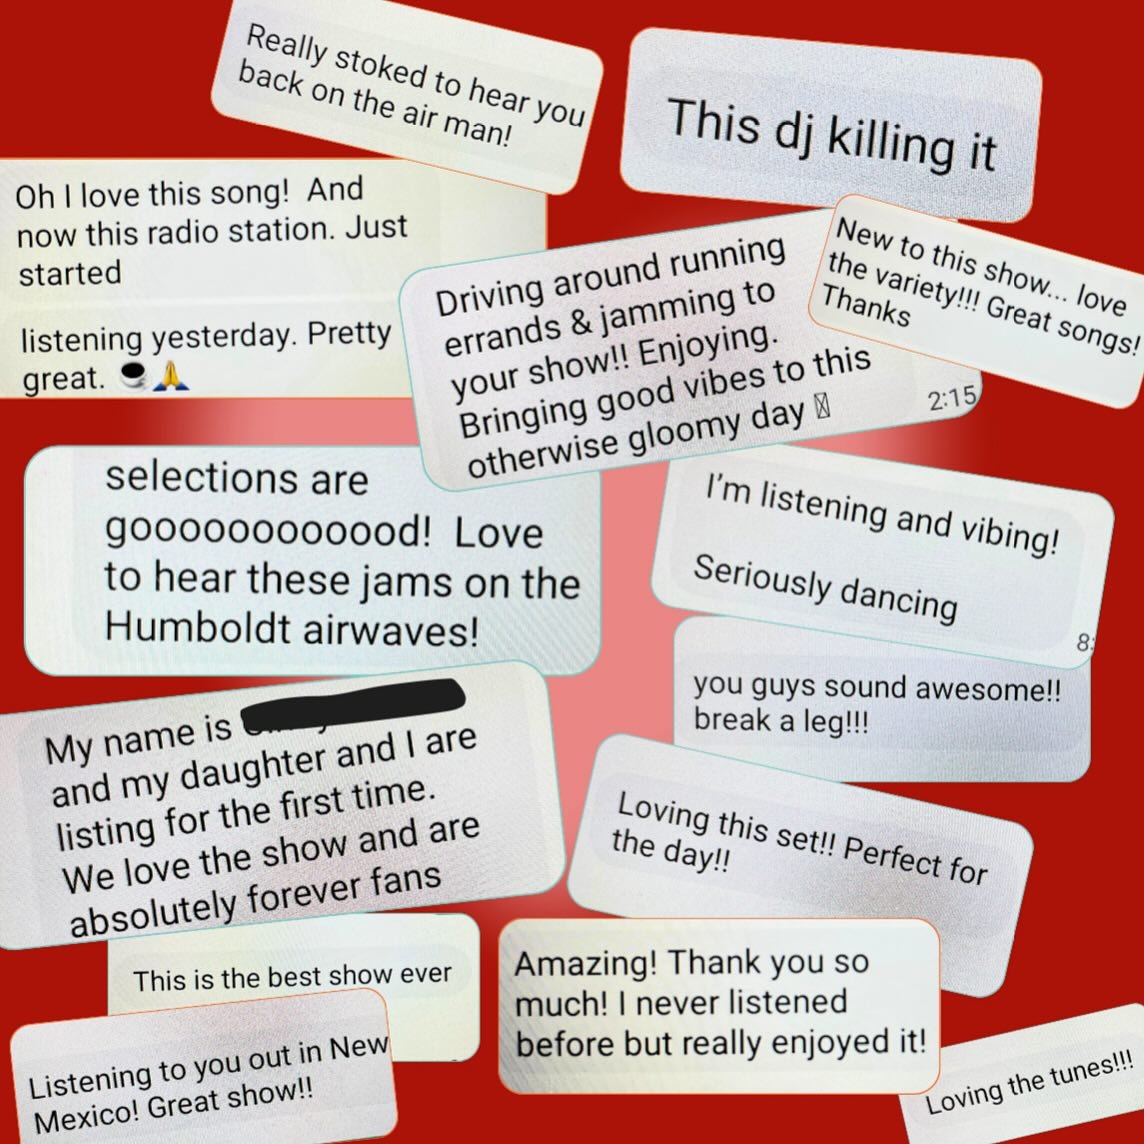 texts into our air room is our love language 🥹🫶 if you tune in &amp; like what you hear, let the DJ know !! It means a lot to know you&rsquo;re out there listening &hearts;️ here&rsquo;s a sampling of sweet texts we&rsquo;ve received on our studio 